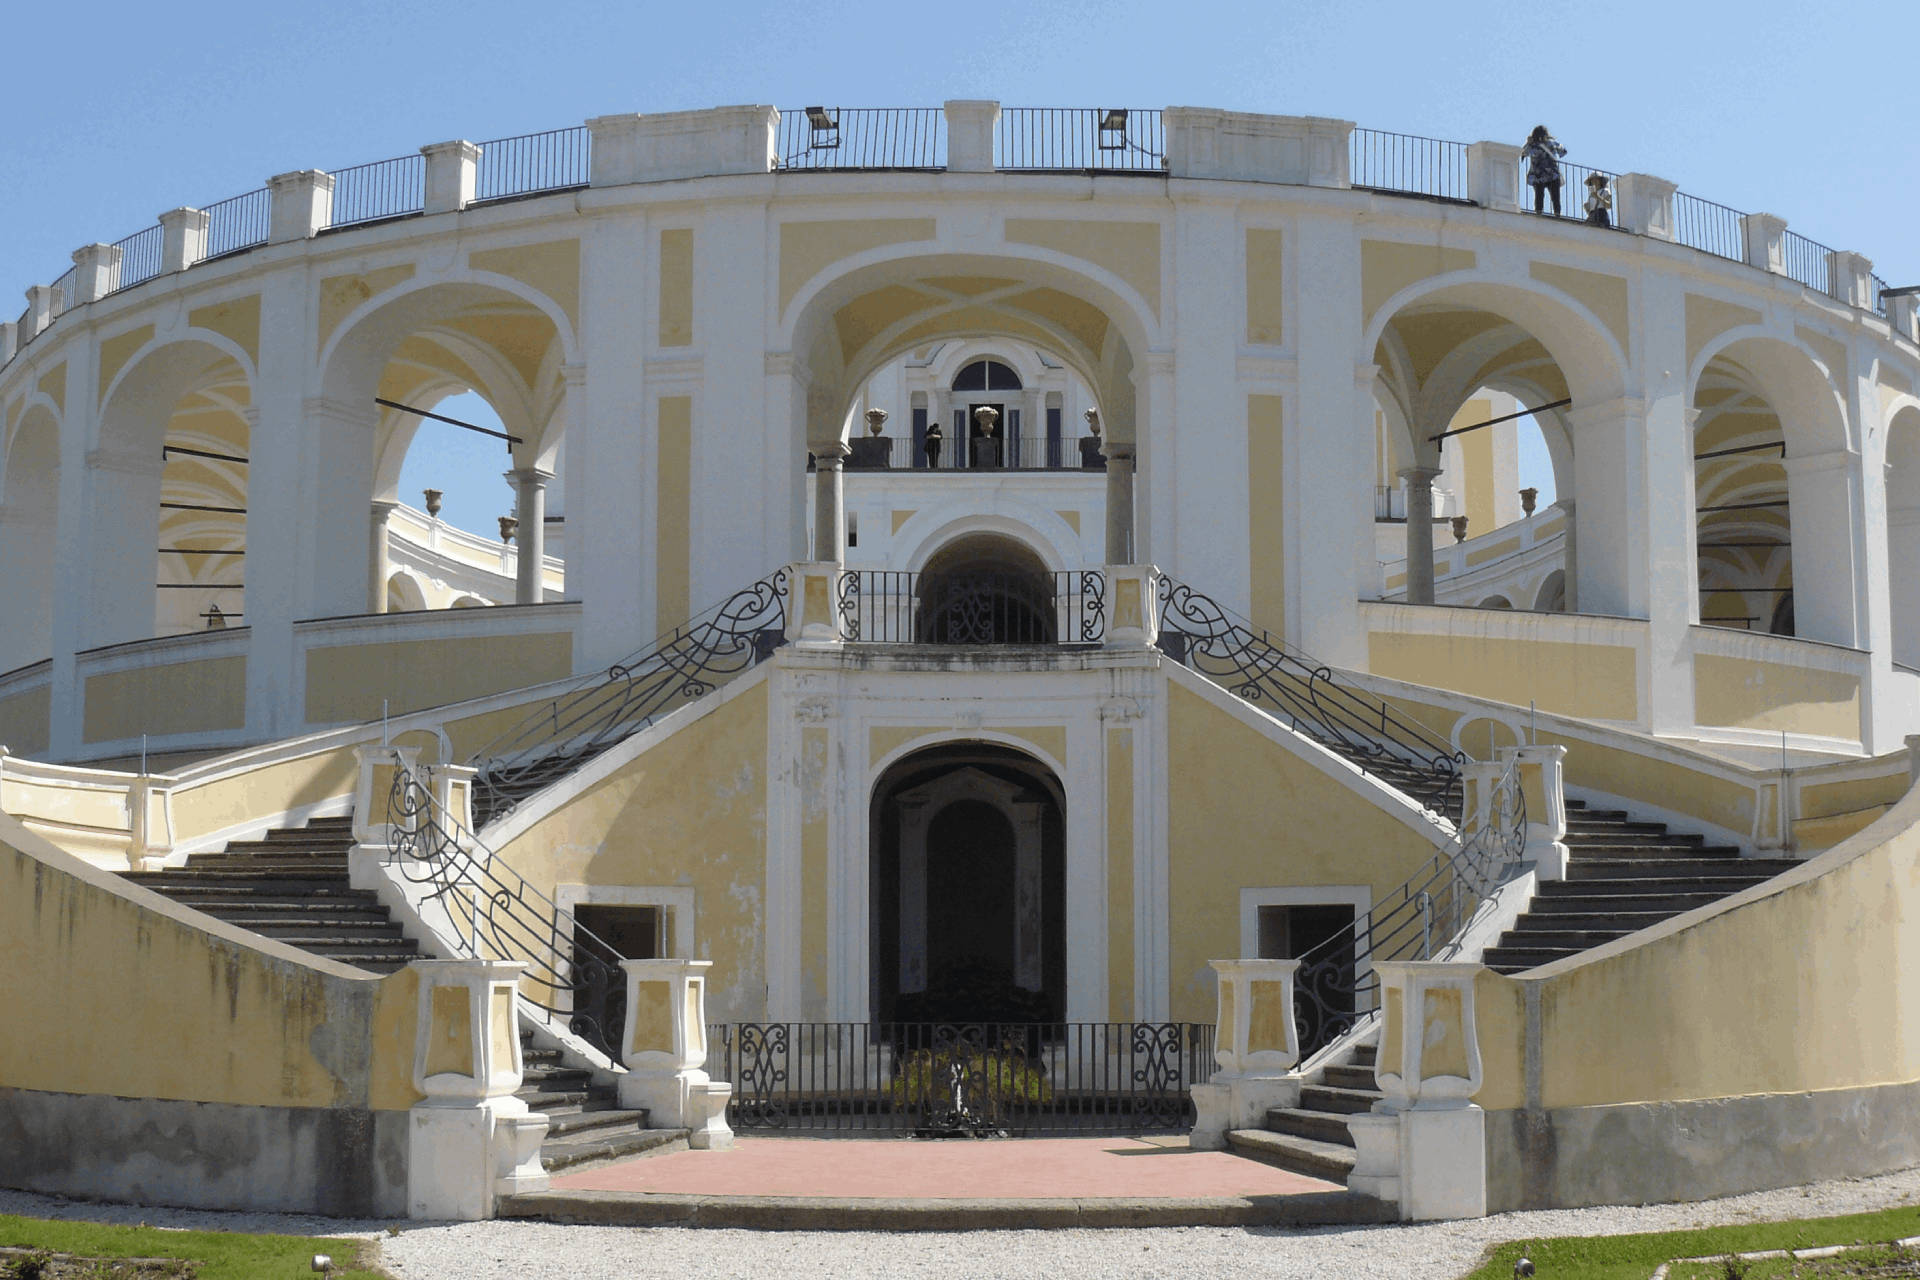 Villa Campolieto: Tour between Luxury and the Past